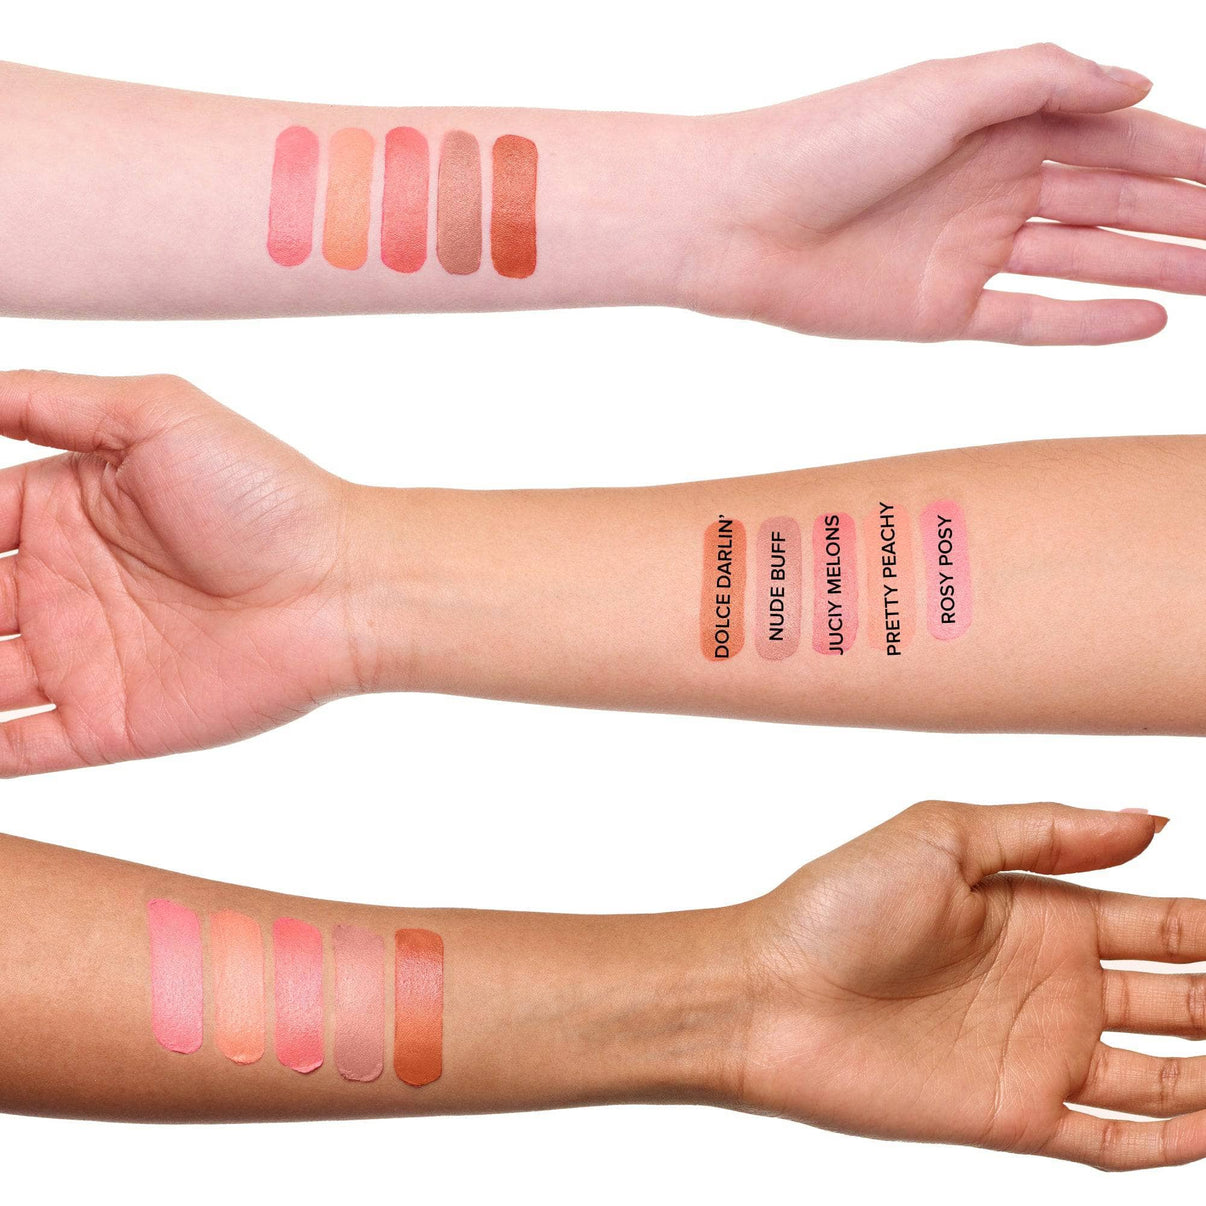 Arms with swatches of Nudies Matte Lux in shade Juicy Melons and other shades -8